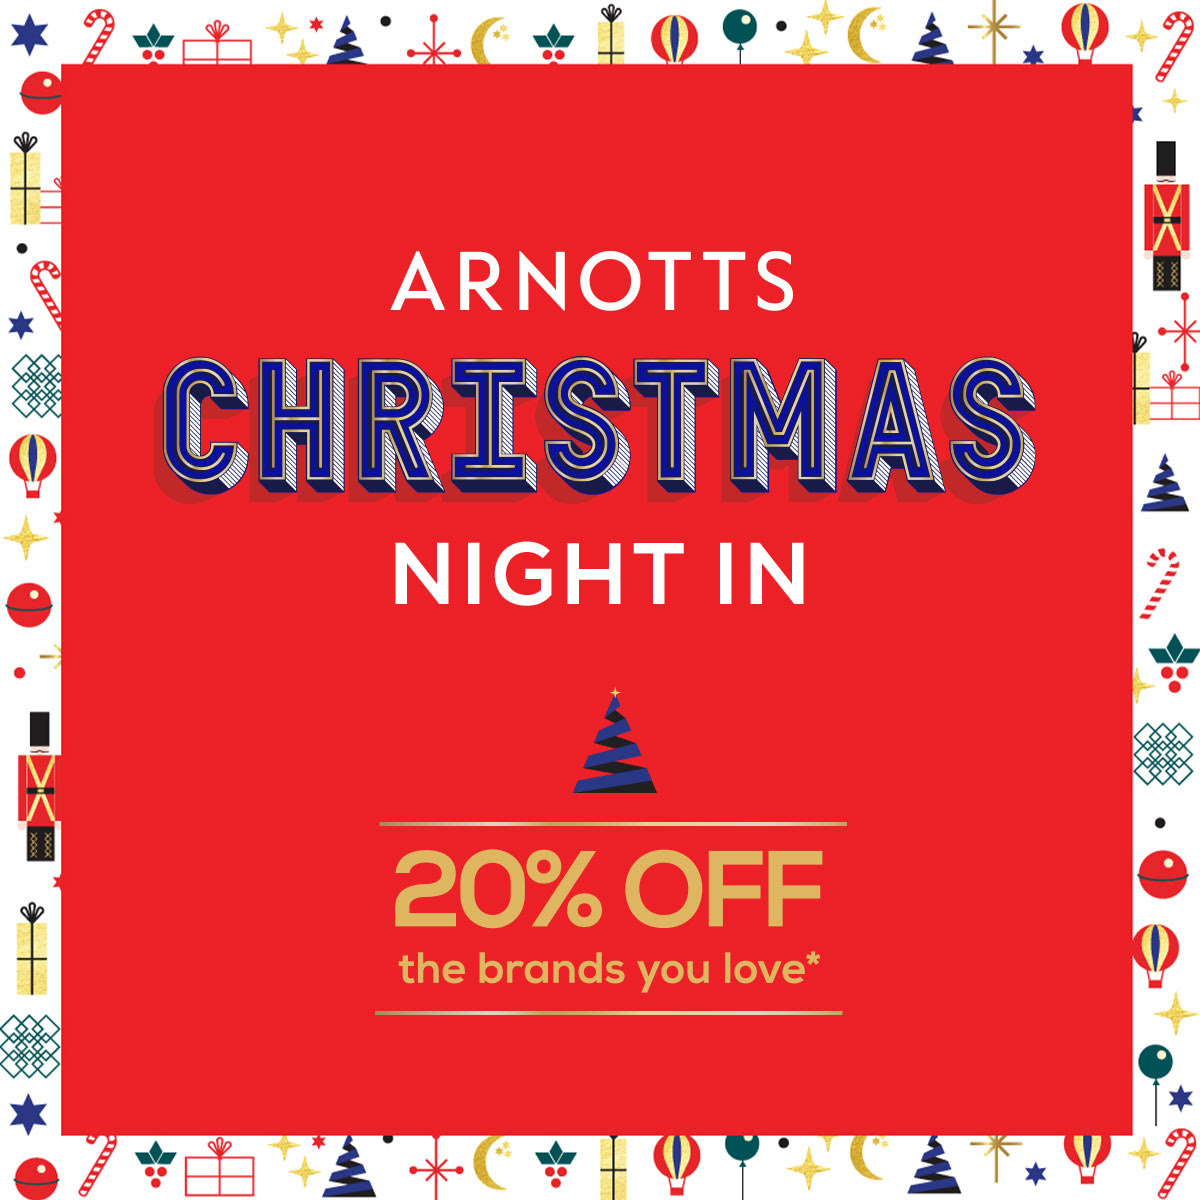 Arnotts - Don't forget - Christmas Night In is on its way!